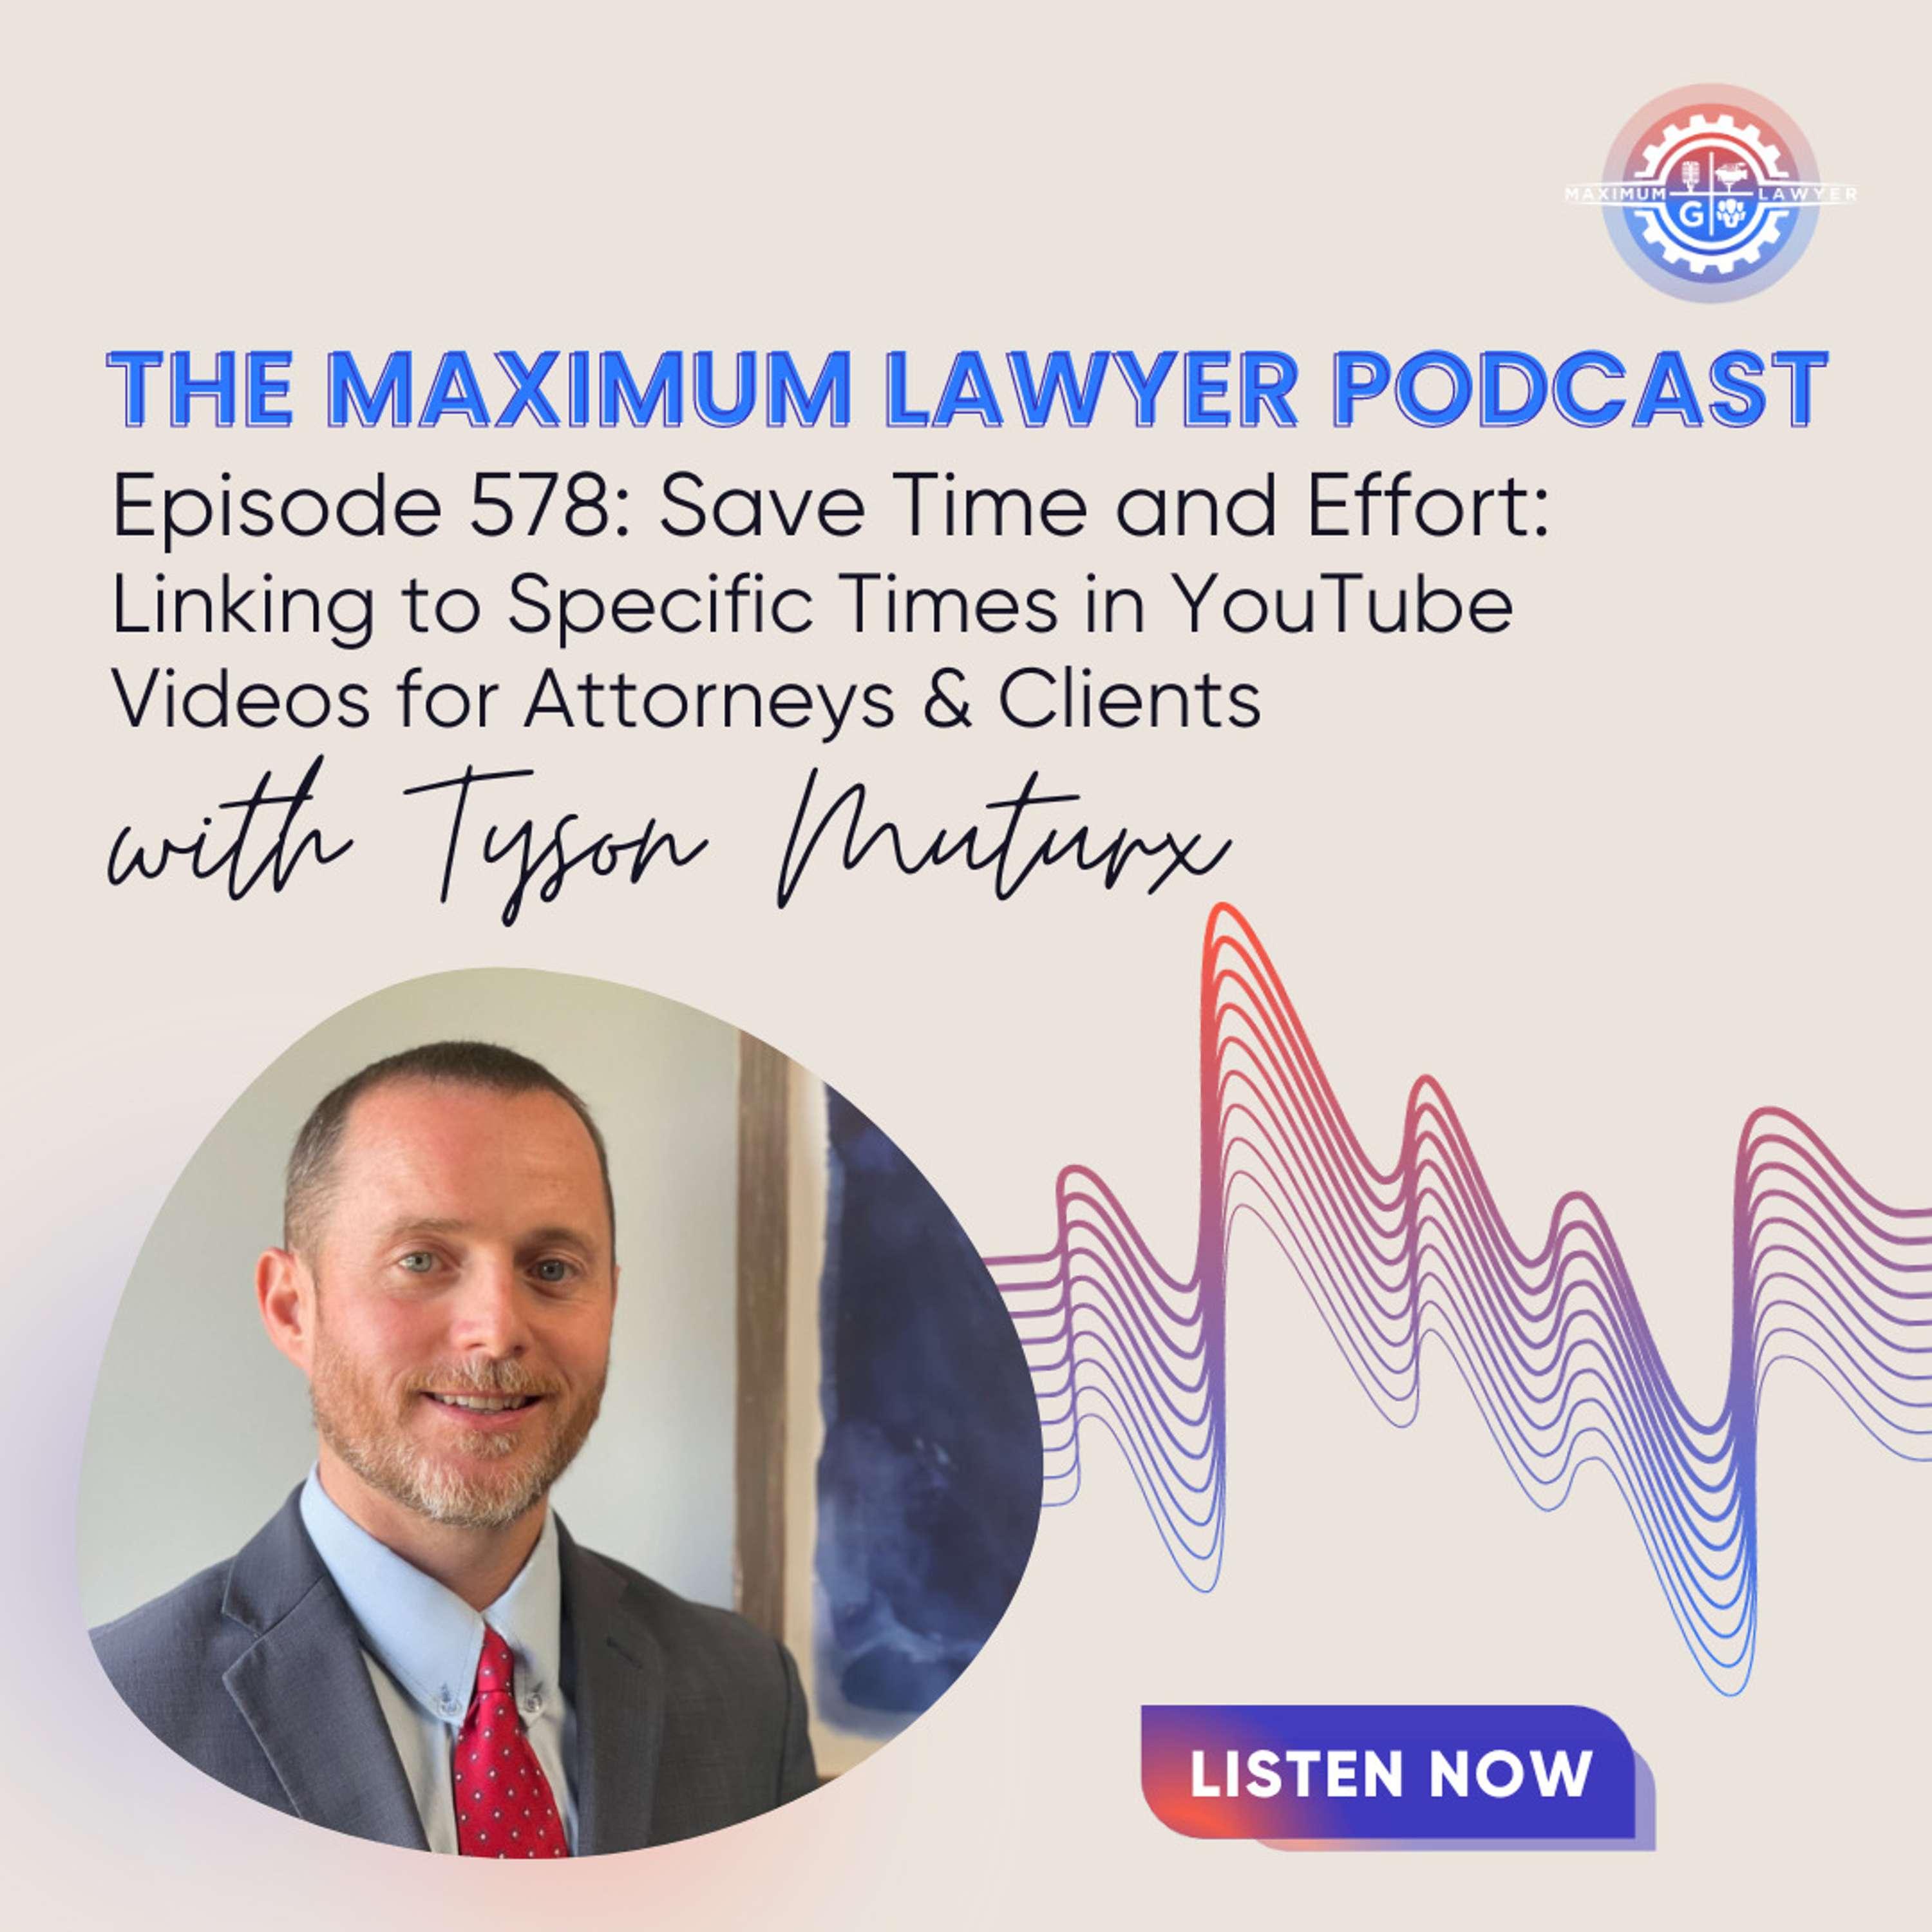 Save Time and Effort: Linking to Specific Times in YouTube Videos for Attorneys & Clients